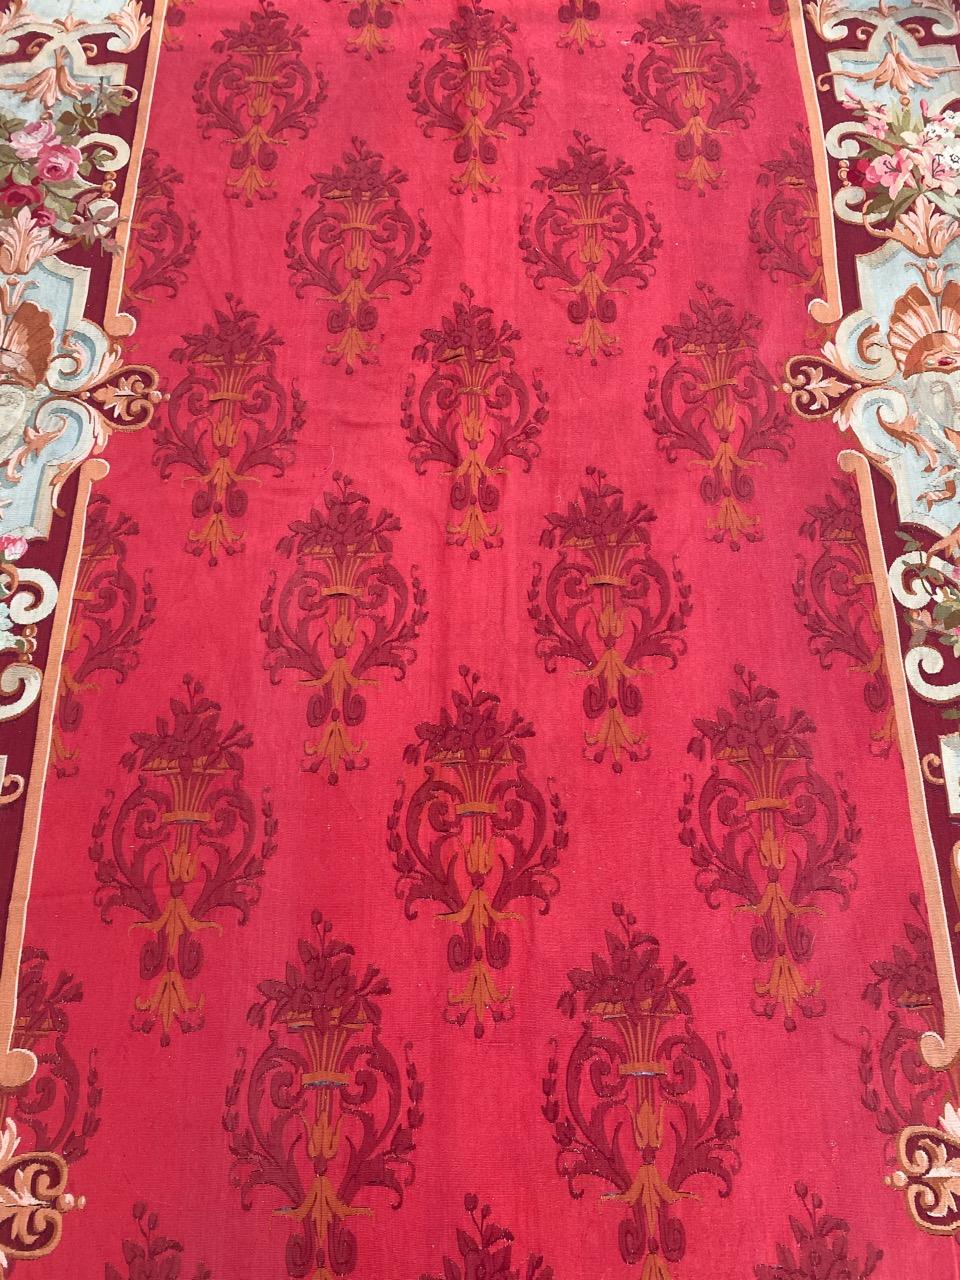 Hand-Woven Wonderful Luxurious Antique Napoleon the Third Aubusson Tapestry Runner Rug For Sale